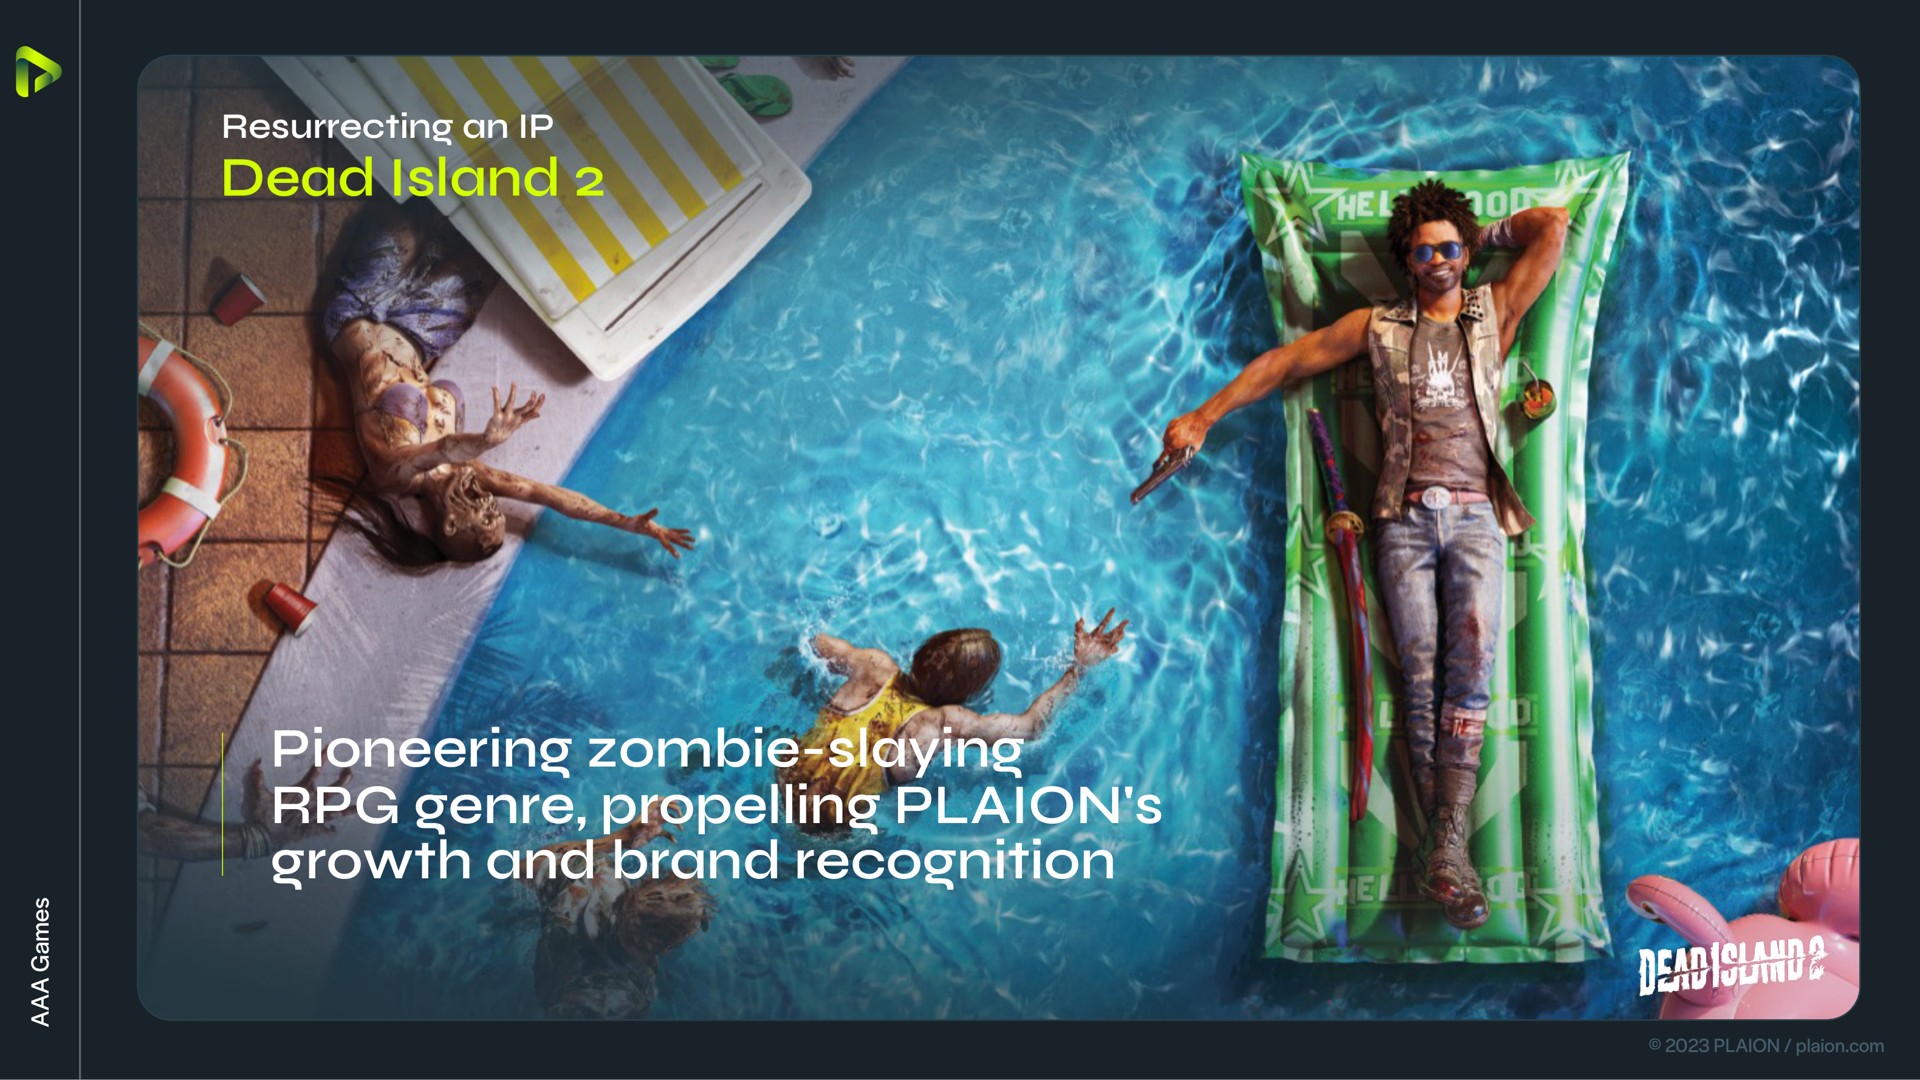 dead island pioneering zombie slaying genre growth and brand recognition | Embracer Group